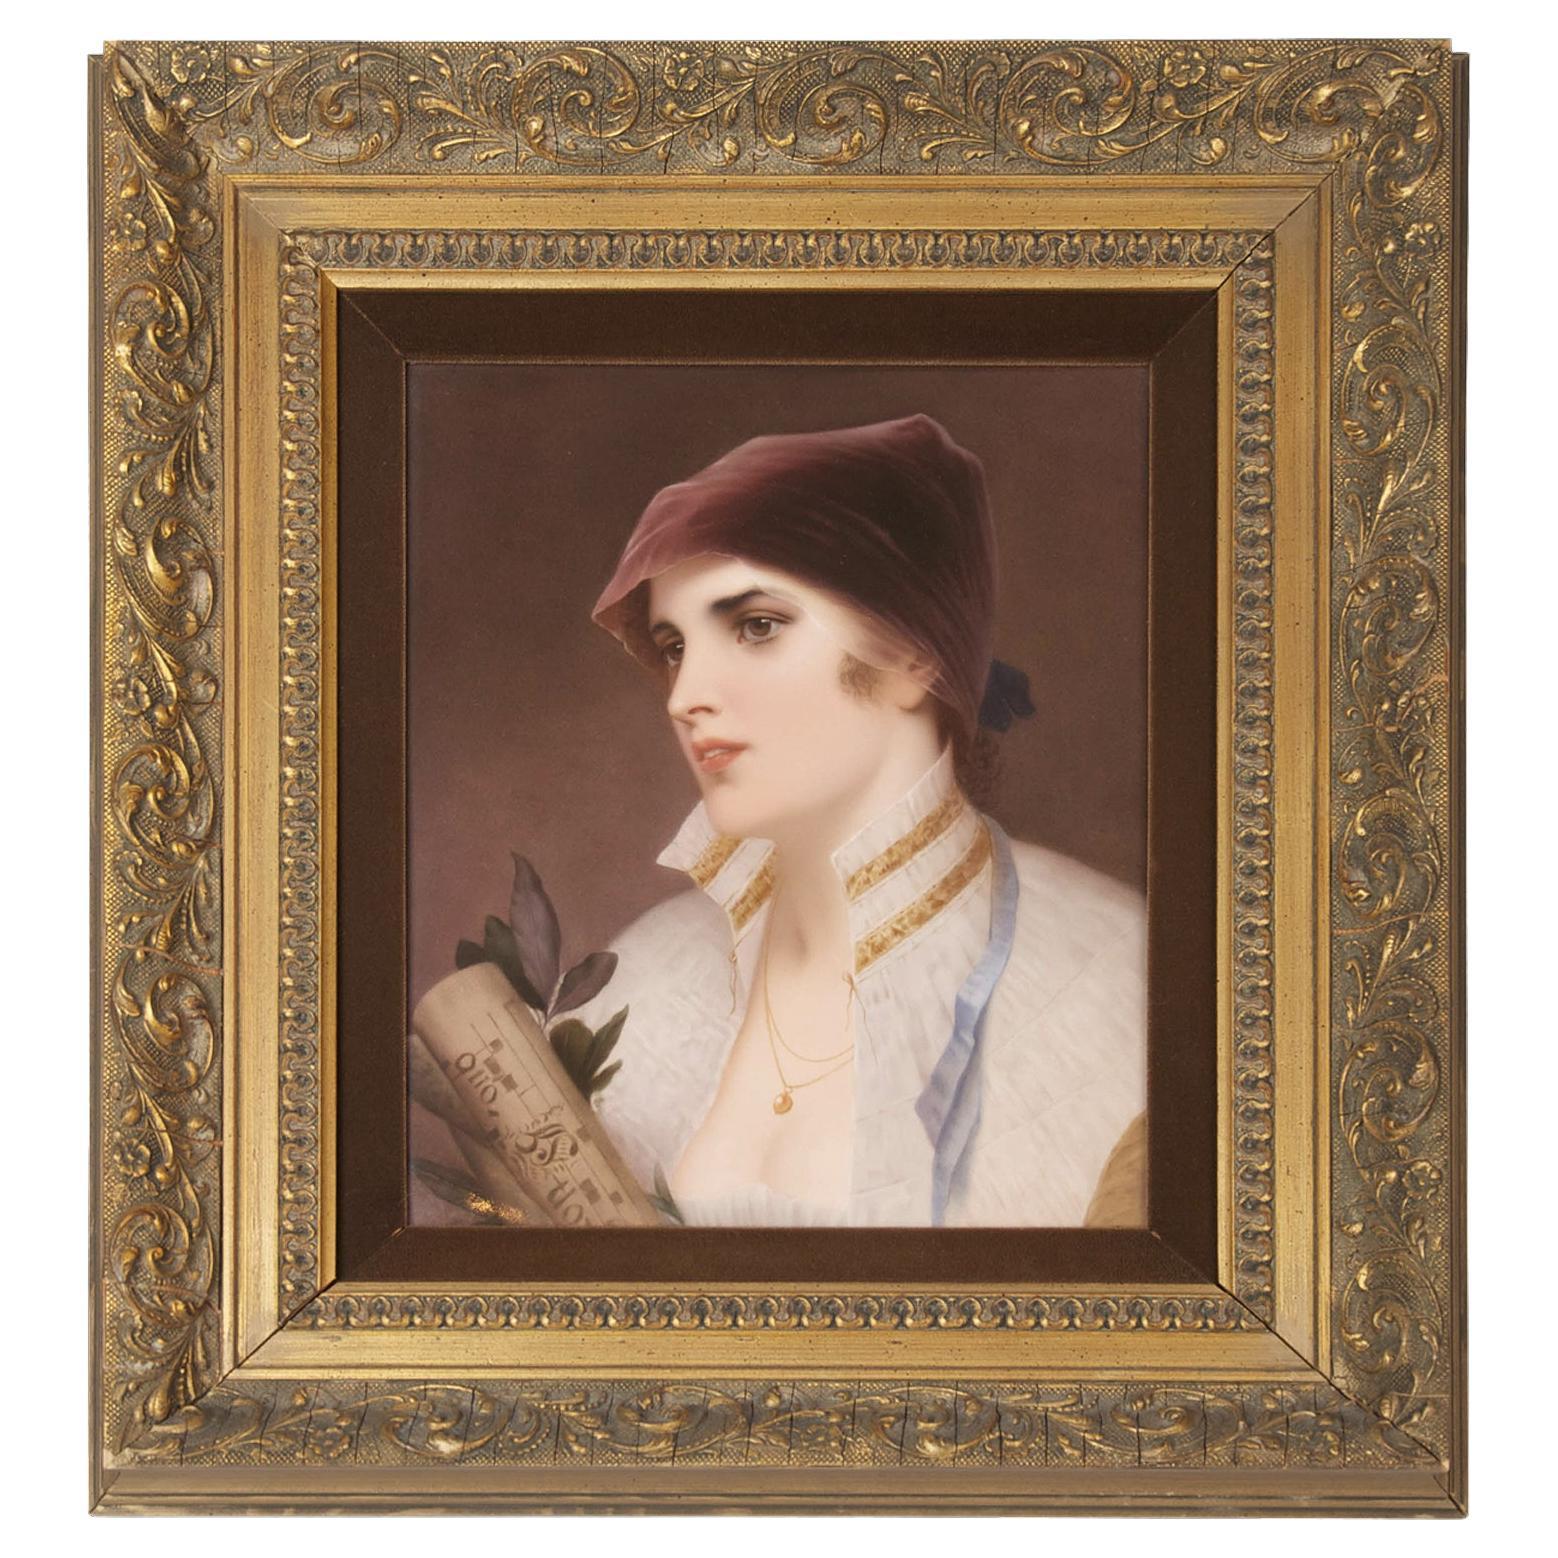 Berlin (KPM) Porcelain Plaque Of A Young Woman, In a Giltwood Frame For Sale